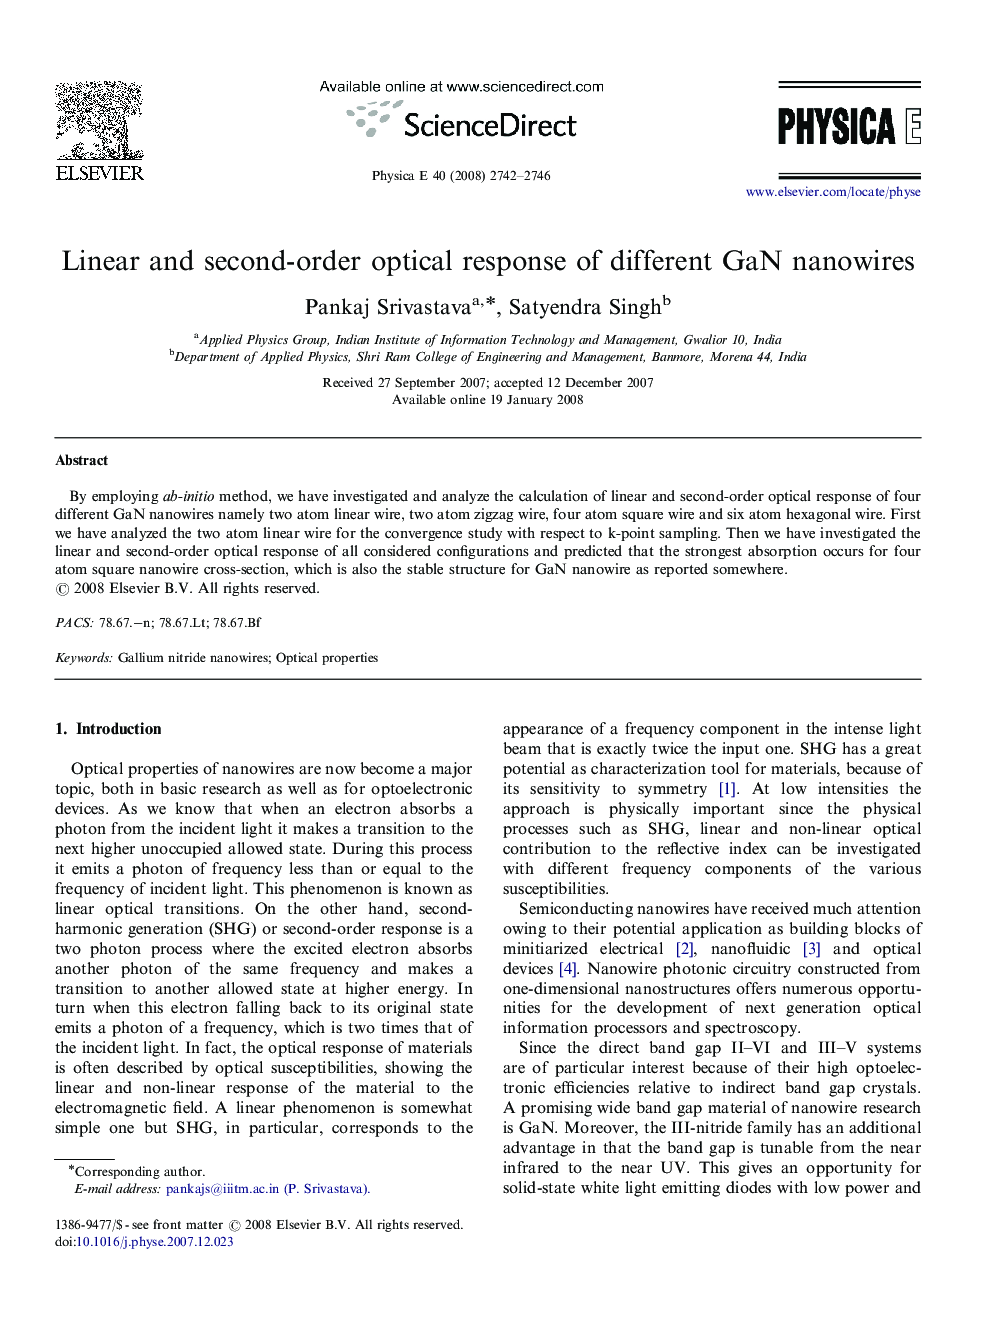 Linear and second-order optical response of different GaN nanowires